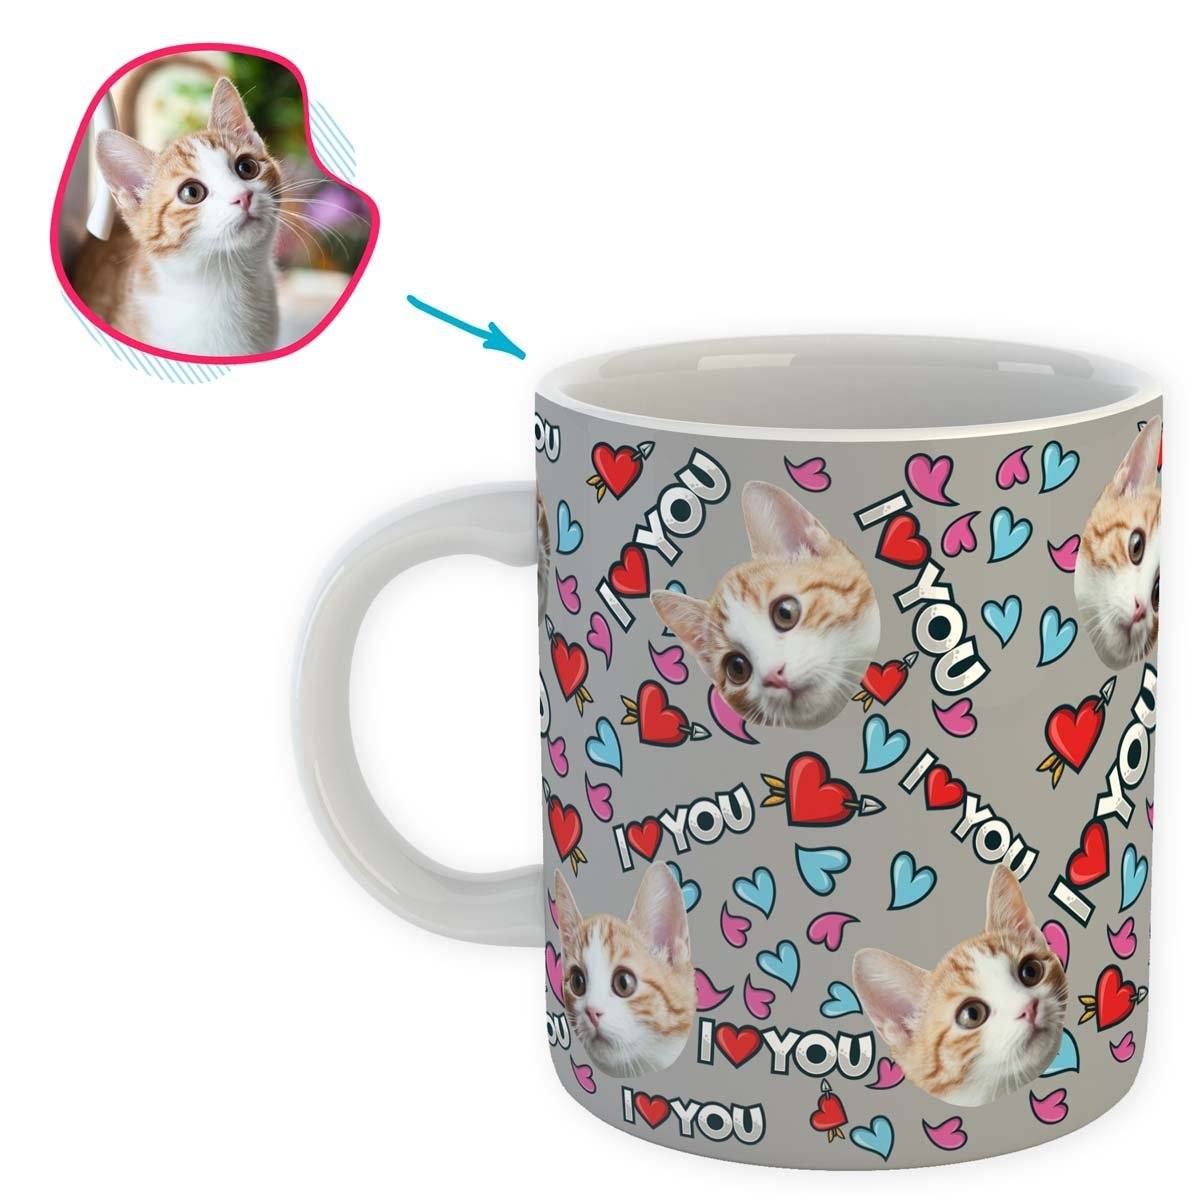 grey Love You mug personalized with photo of face printed on it